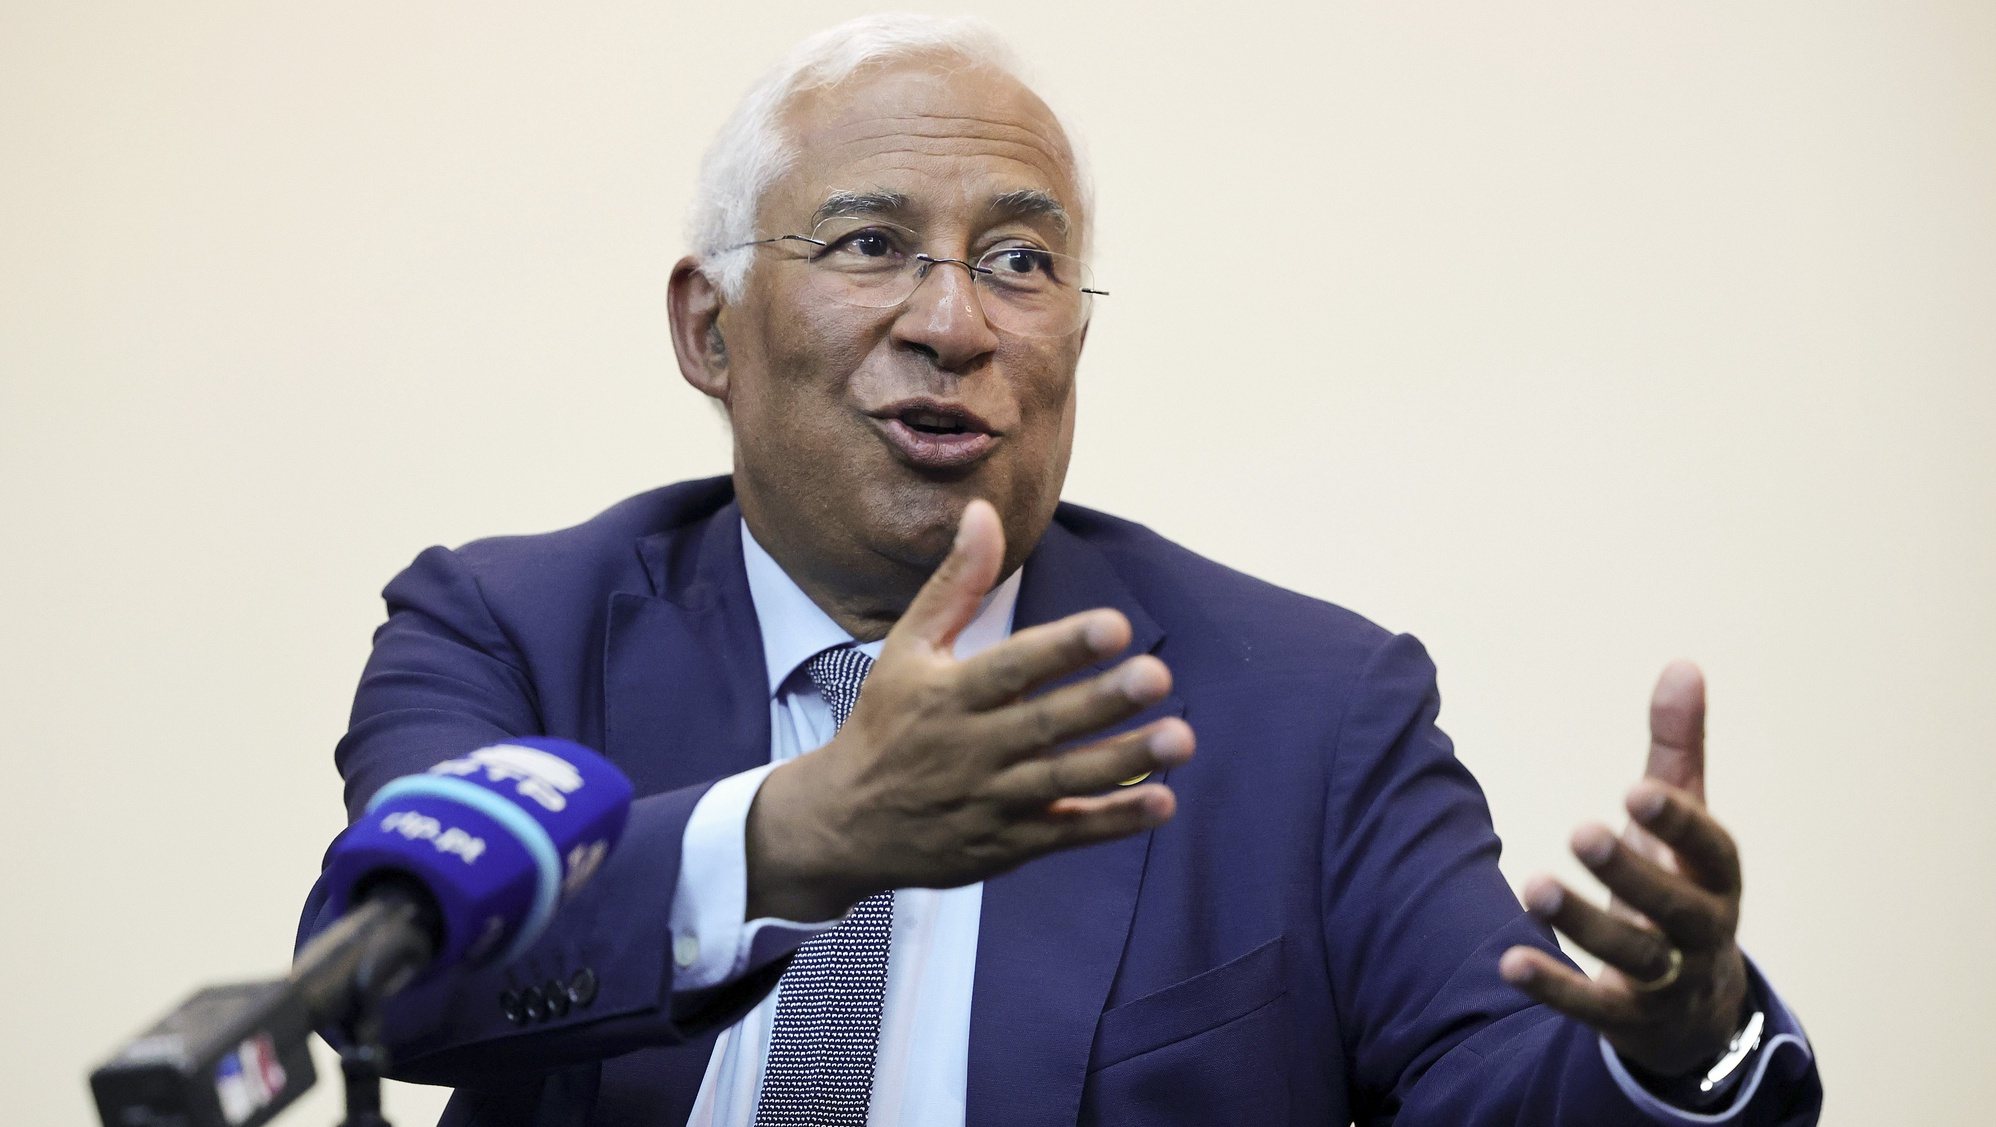 Portuguese Prime Minister Antonio Costa during the press conference at the end of the XIV CPLP Conference in Sao Tome and Principe, 27th August 2023. The CPLP, which includes Angola, Brazil, Cape Verde, Guinea-Bissau, Equatorial Guinea, Mozambique, Portugal, São Tomé and Príncipe and Timor-Leste, holds the 14th Conference of Heads of State and Government, in São Tomé and Príncipe, under the motto &quot;Youth and Sustainability&quot;. ESTELA SILVA/LUSA